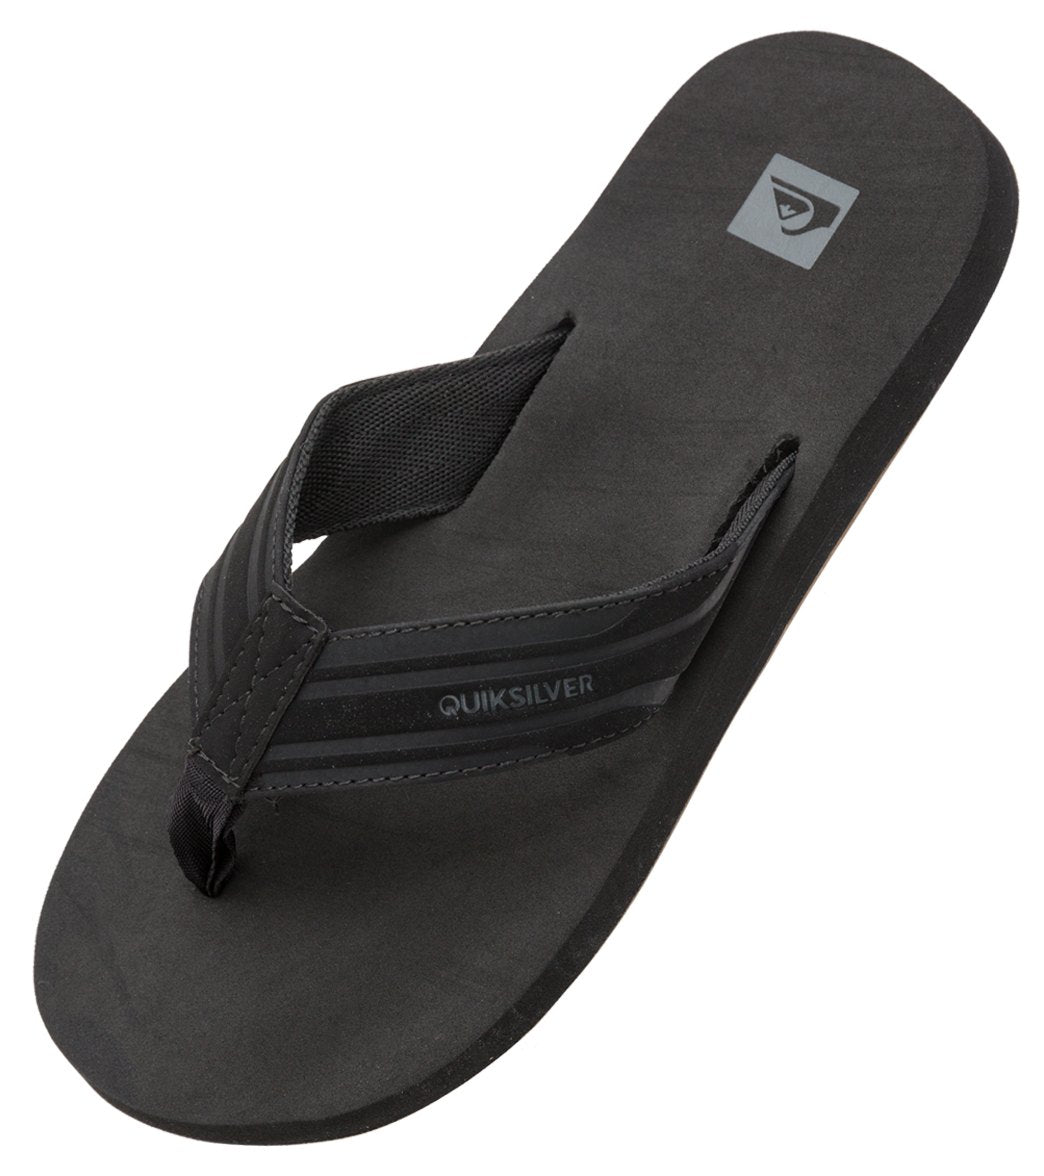 Monkey Wrench Sandals